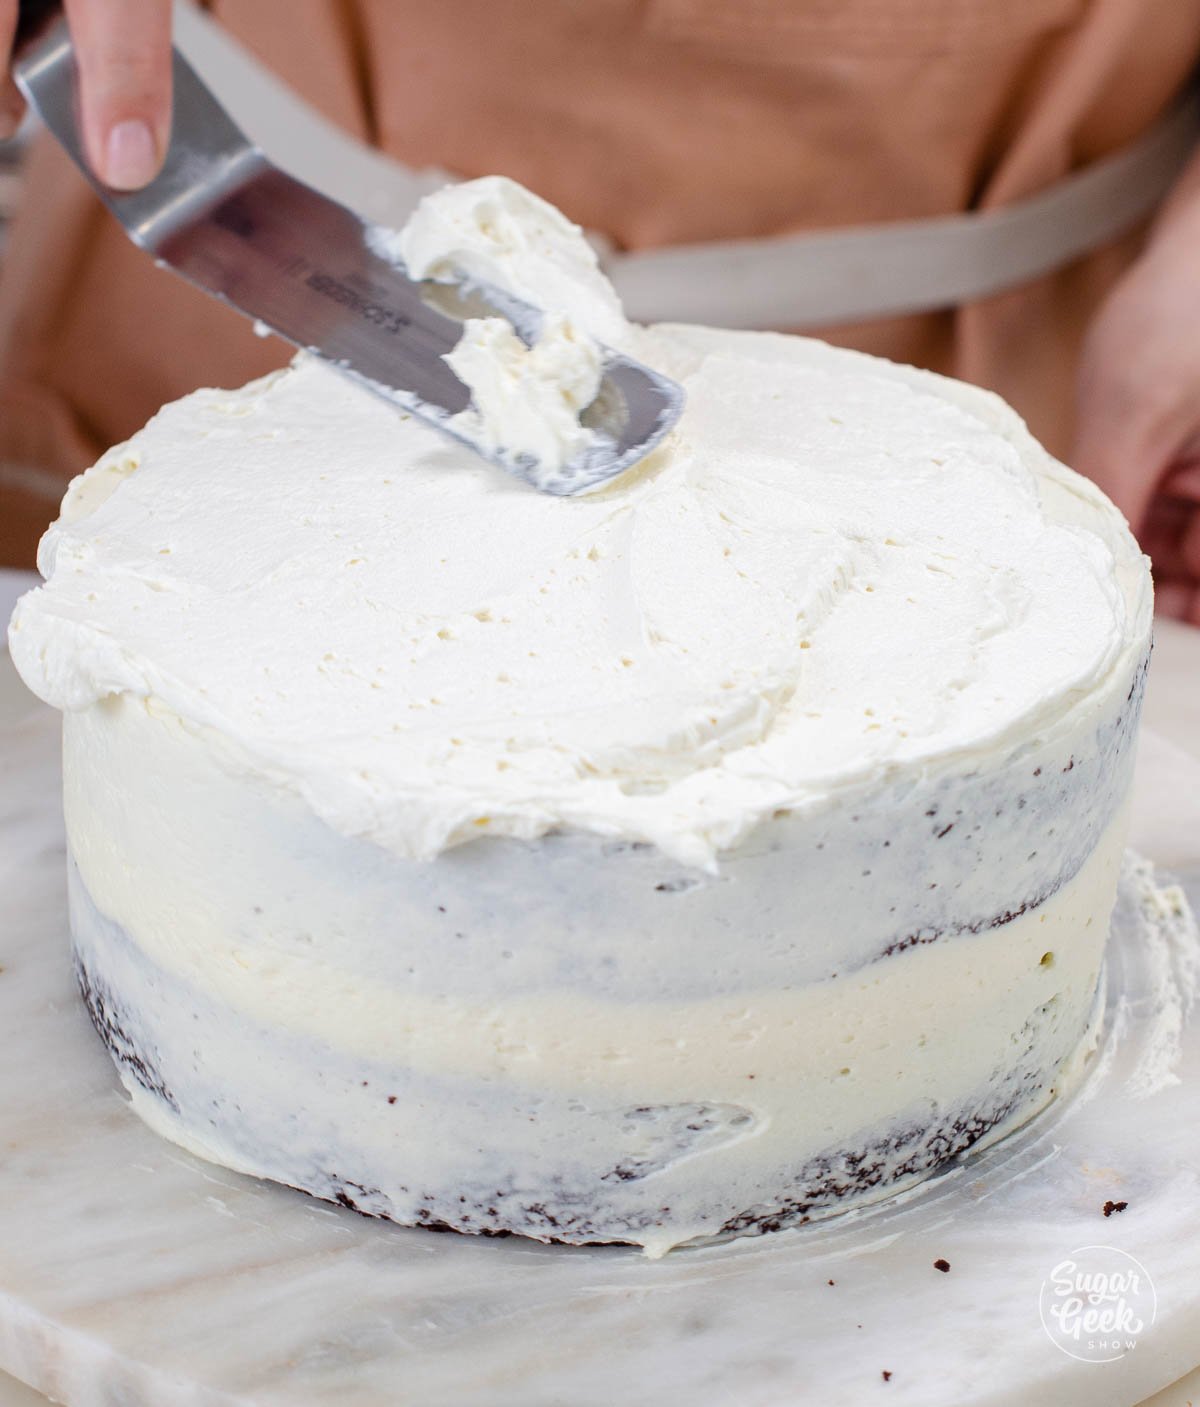 covering the cake in a thin layer of buttercream